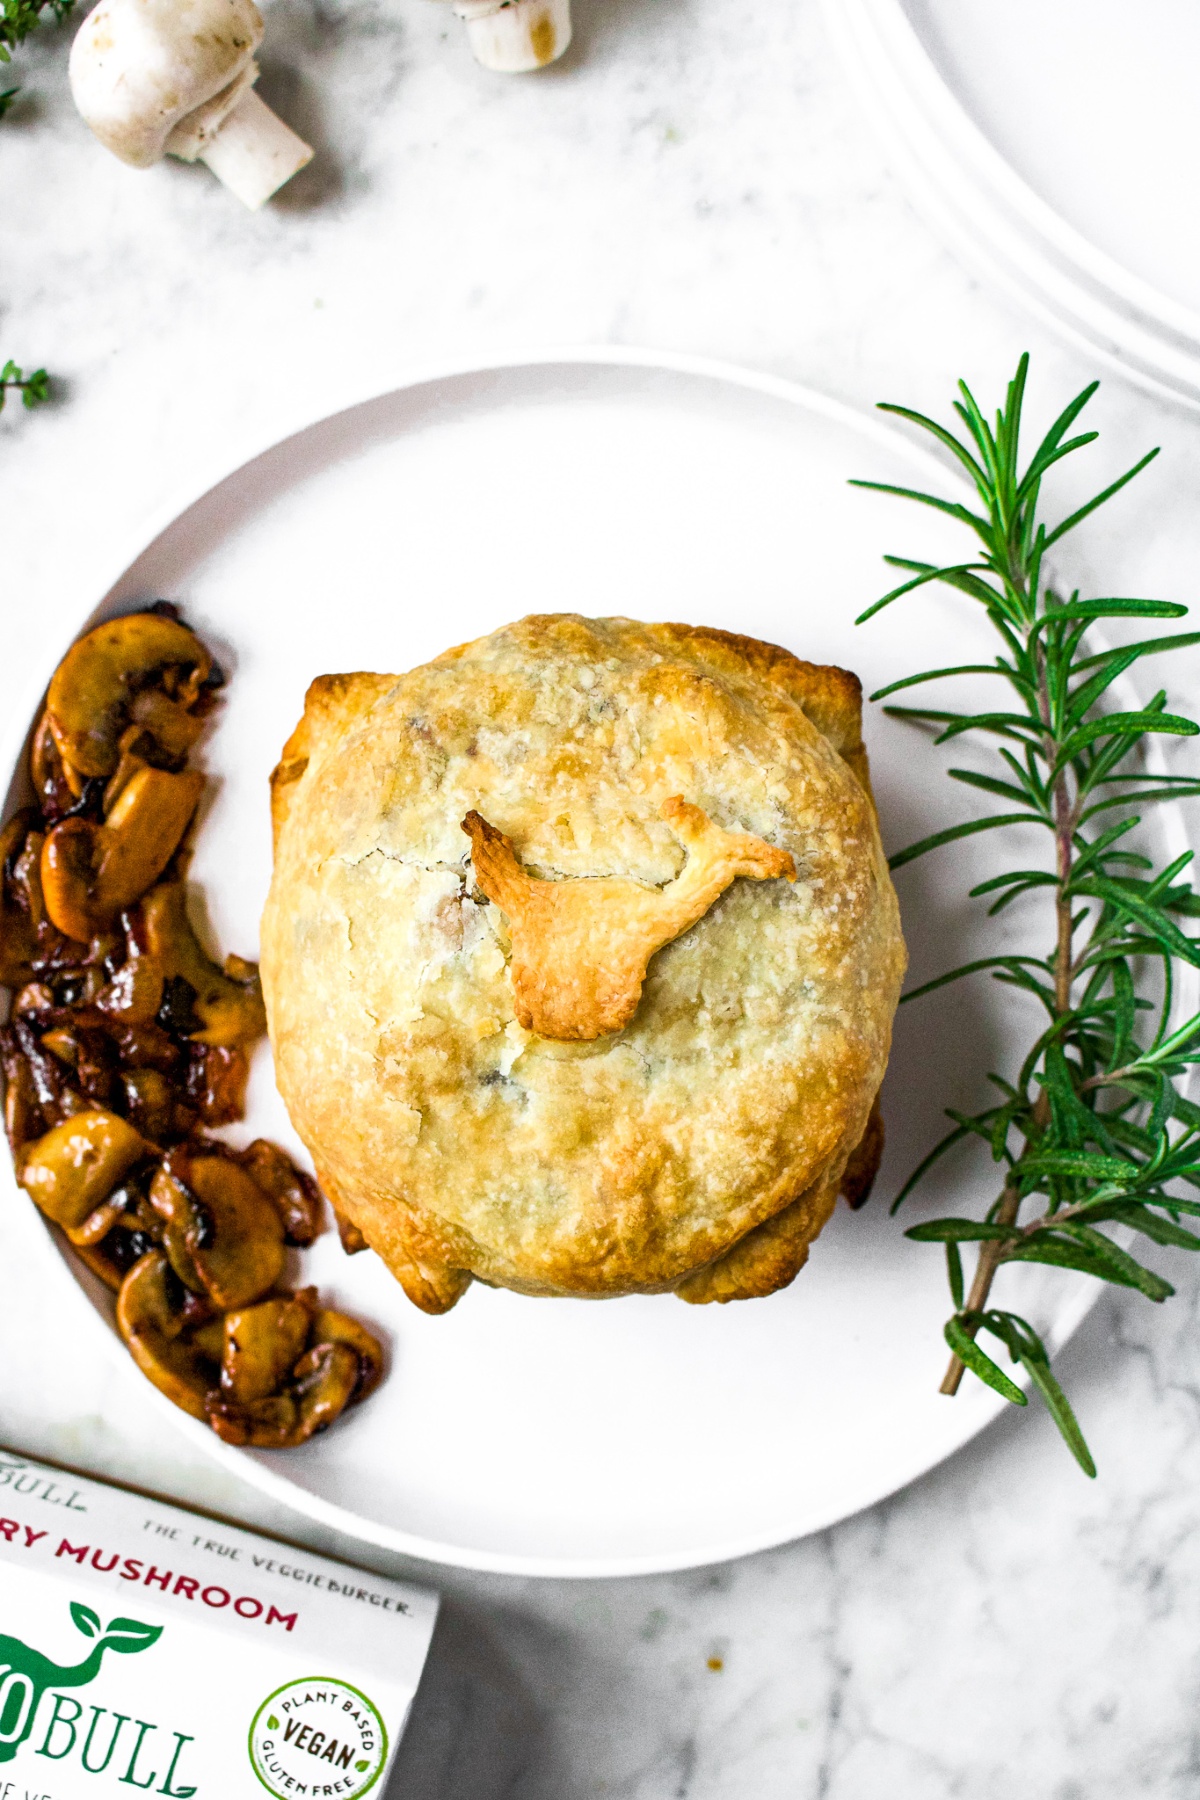 Overhead shot of a vegan mushroom wellington wrapped in crispy puff pastry sitting on a round white plate, surrounded by sauteed mushrooms and onions and a sprig of rosemary